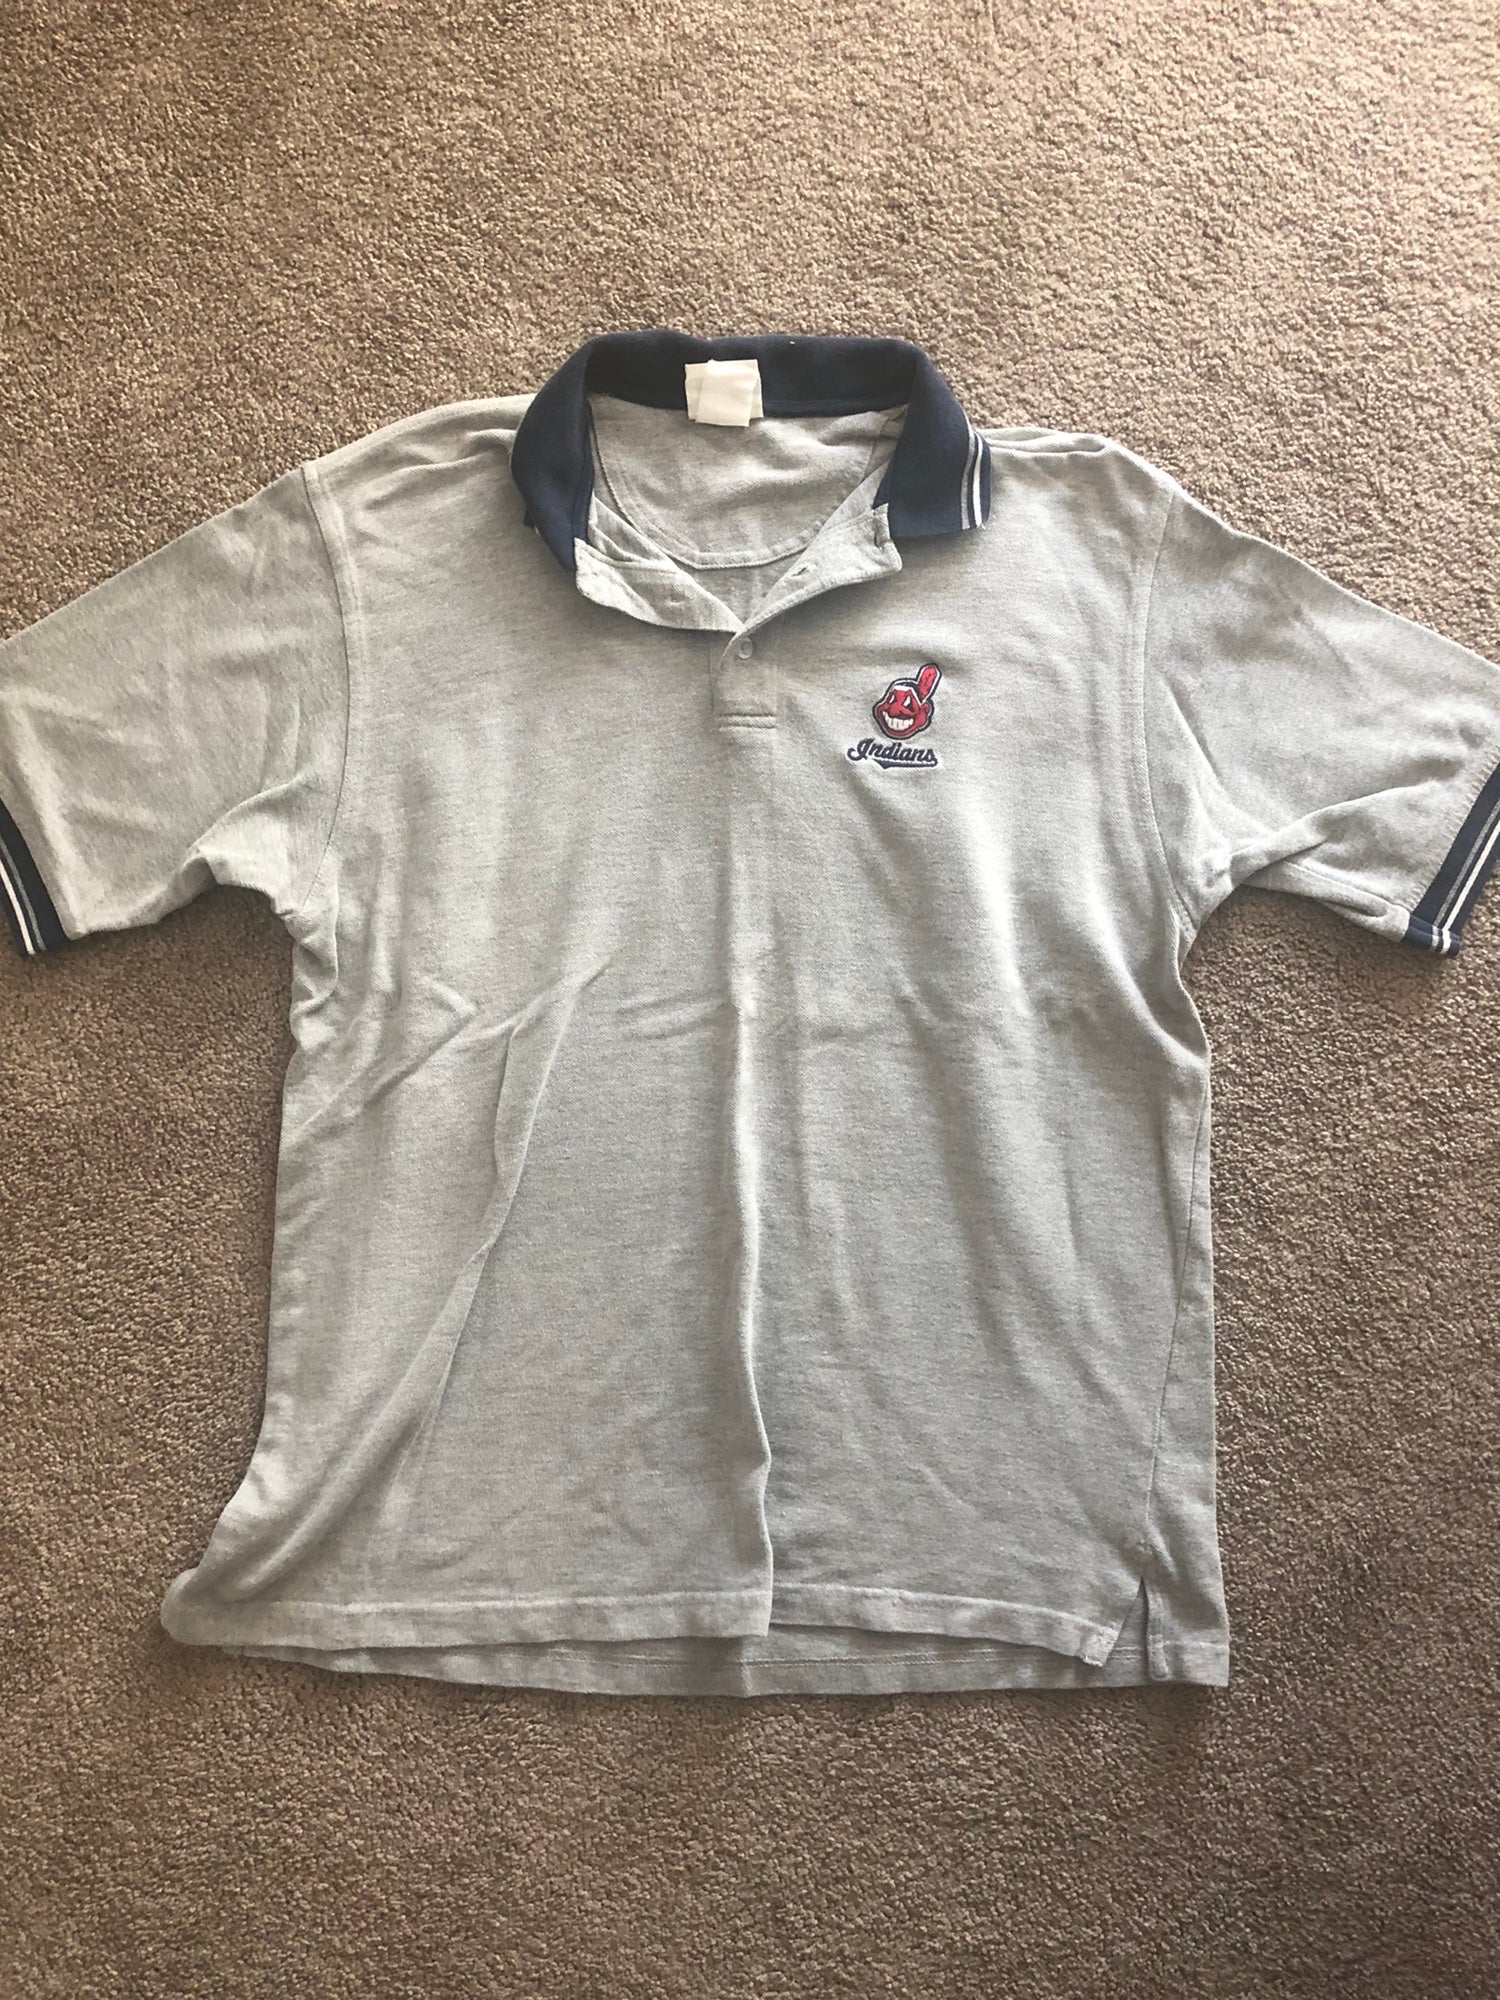 Shirts, 9s Cleveland Indians Polo